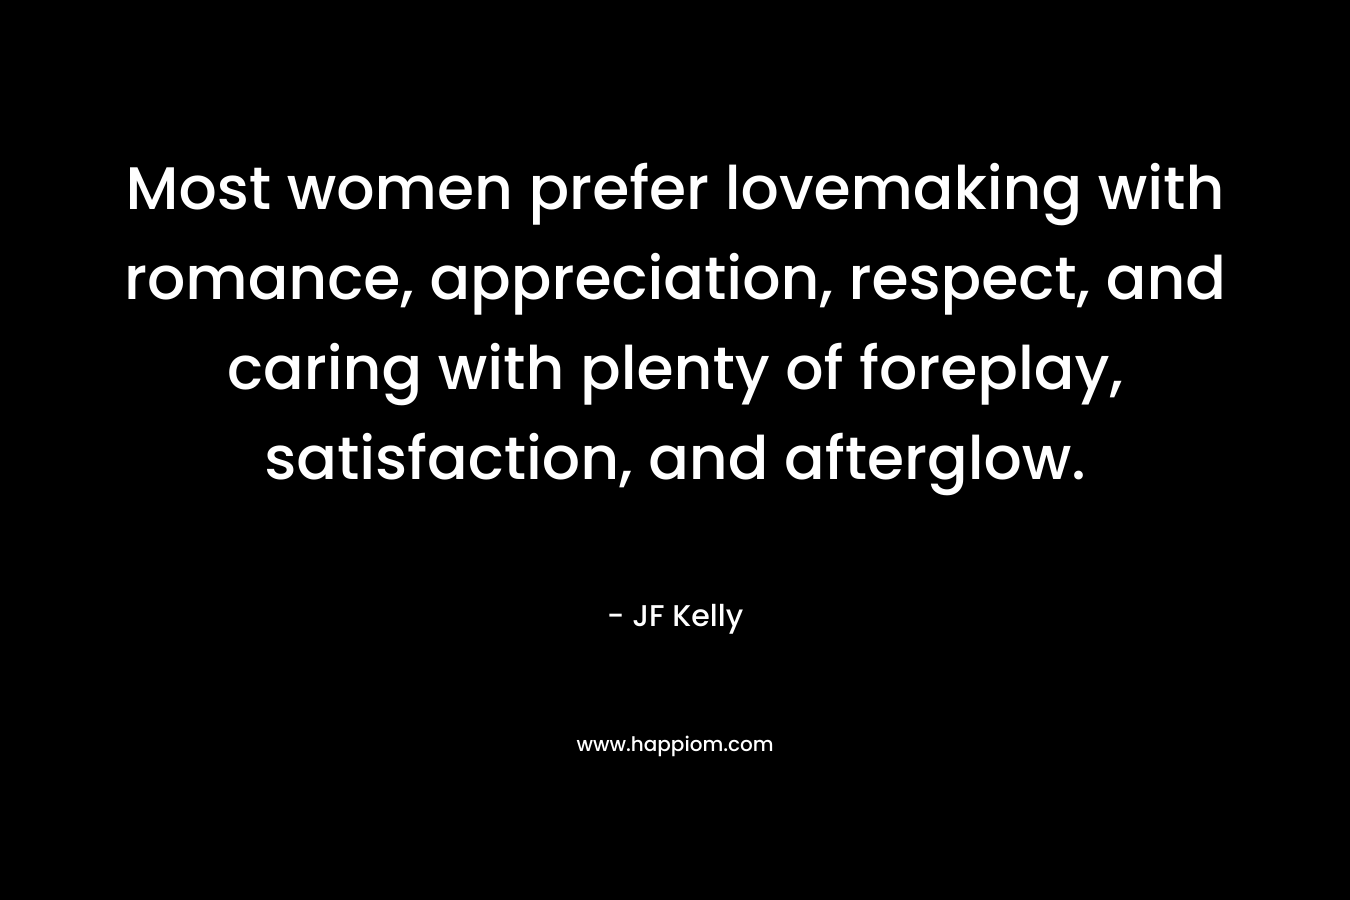 Most women prefer lovemaking with romance, appreciation, respect, and caring with plenty of foreplay, satisfaction, and afterglow. – JF Kelly